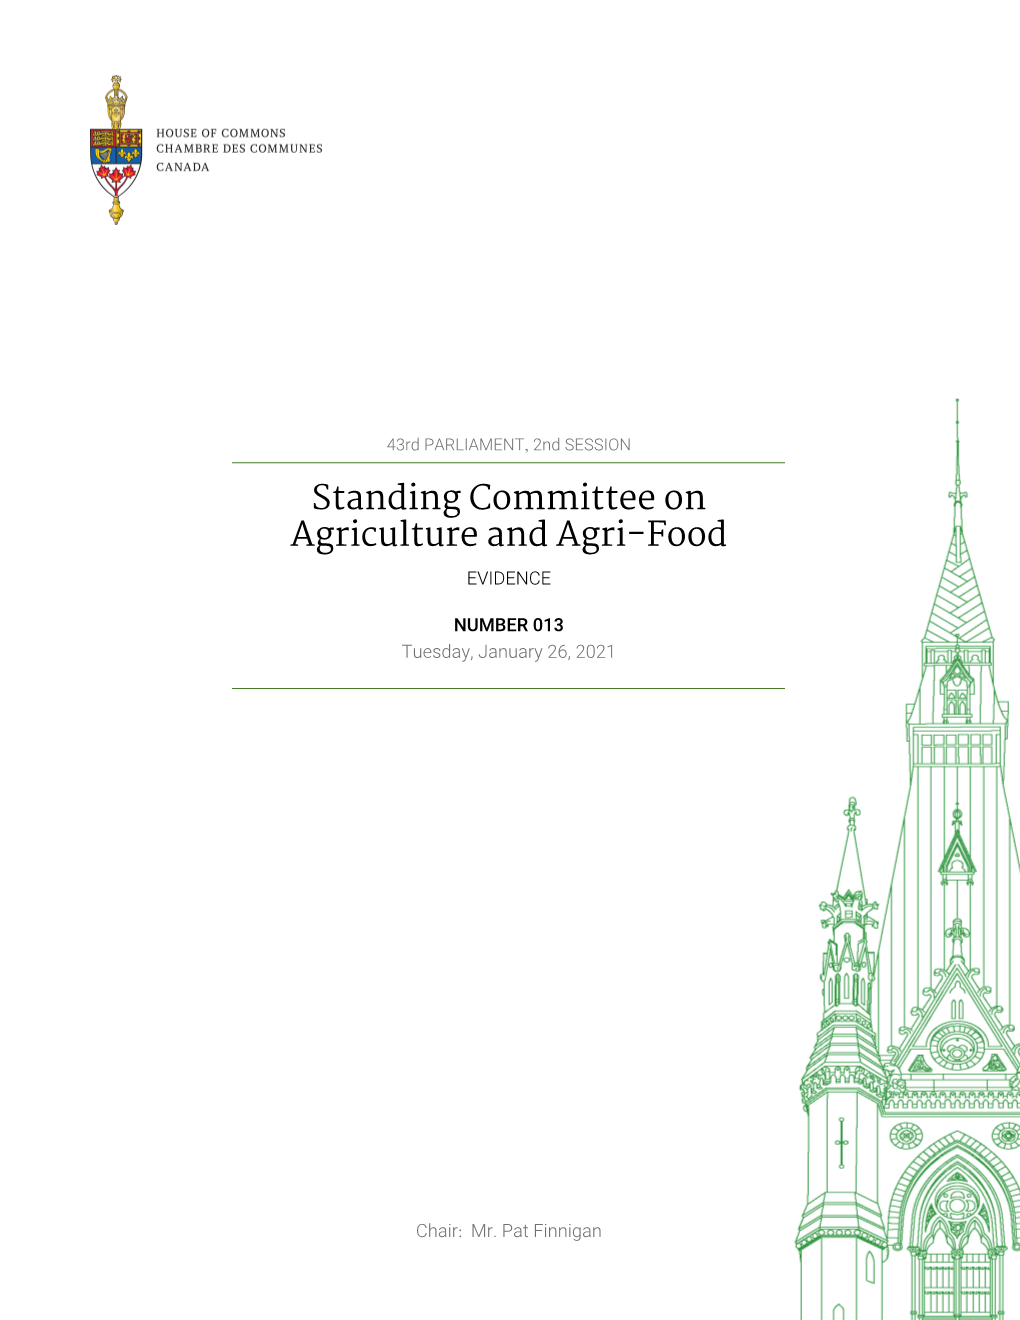 Evidence of the Standing Committee on Agriculture and Agri-Food